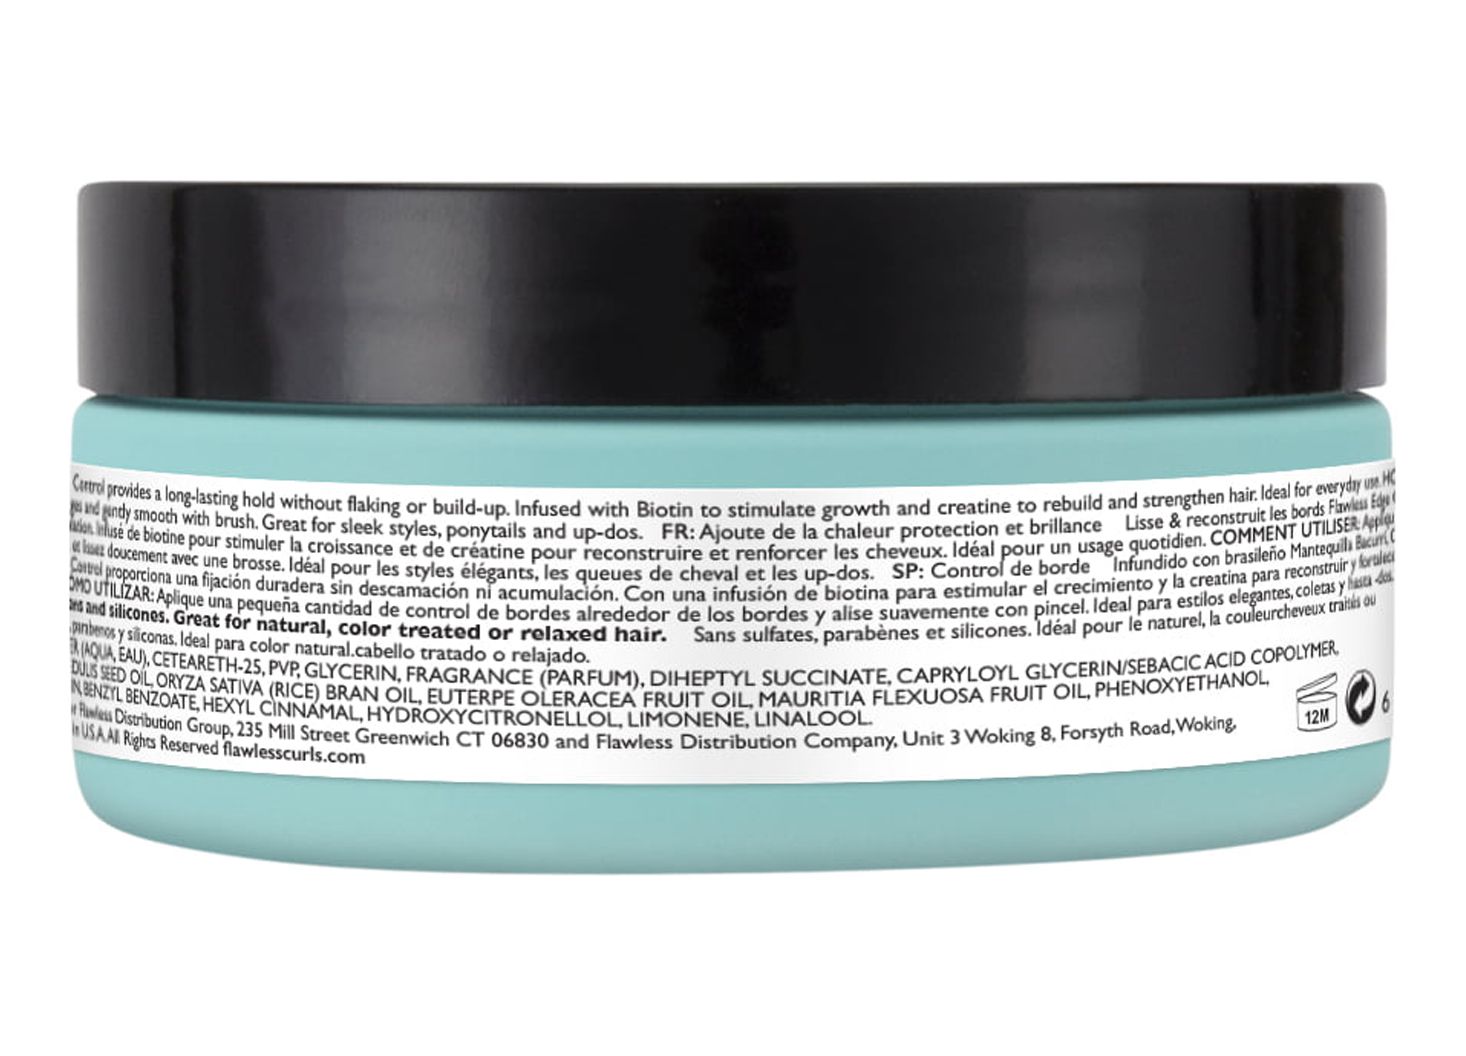 Flawless by Gabrielle Union Edge Control Hair Styling Cream, 2.25 OZ - image 5 of 7